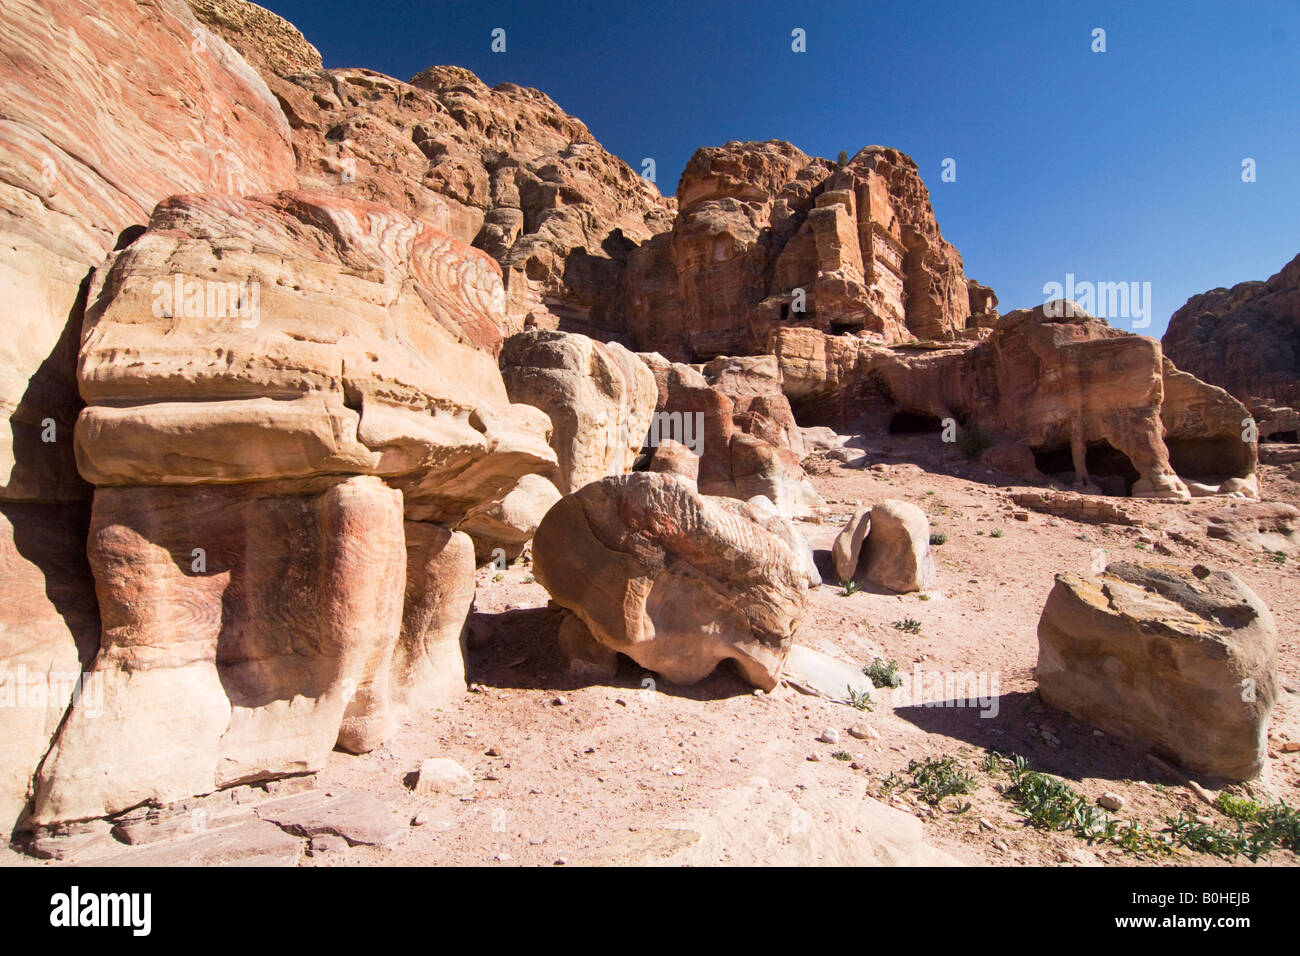 Tombs cut into cliffs, rock face in Petra, Jordan, Middle East Stock Photo